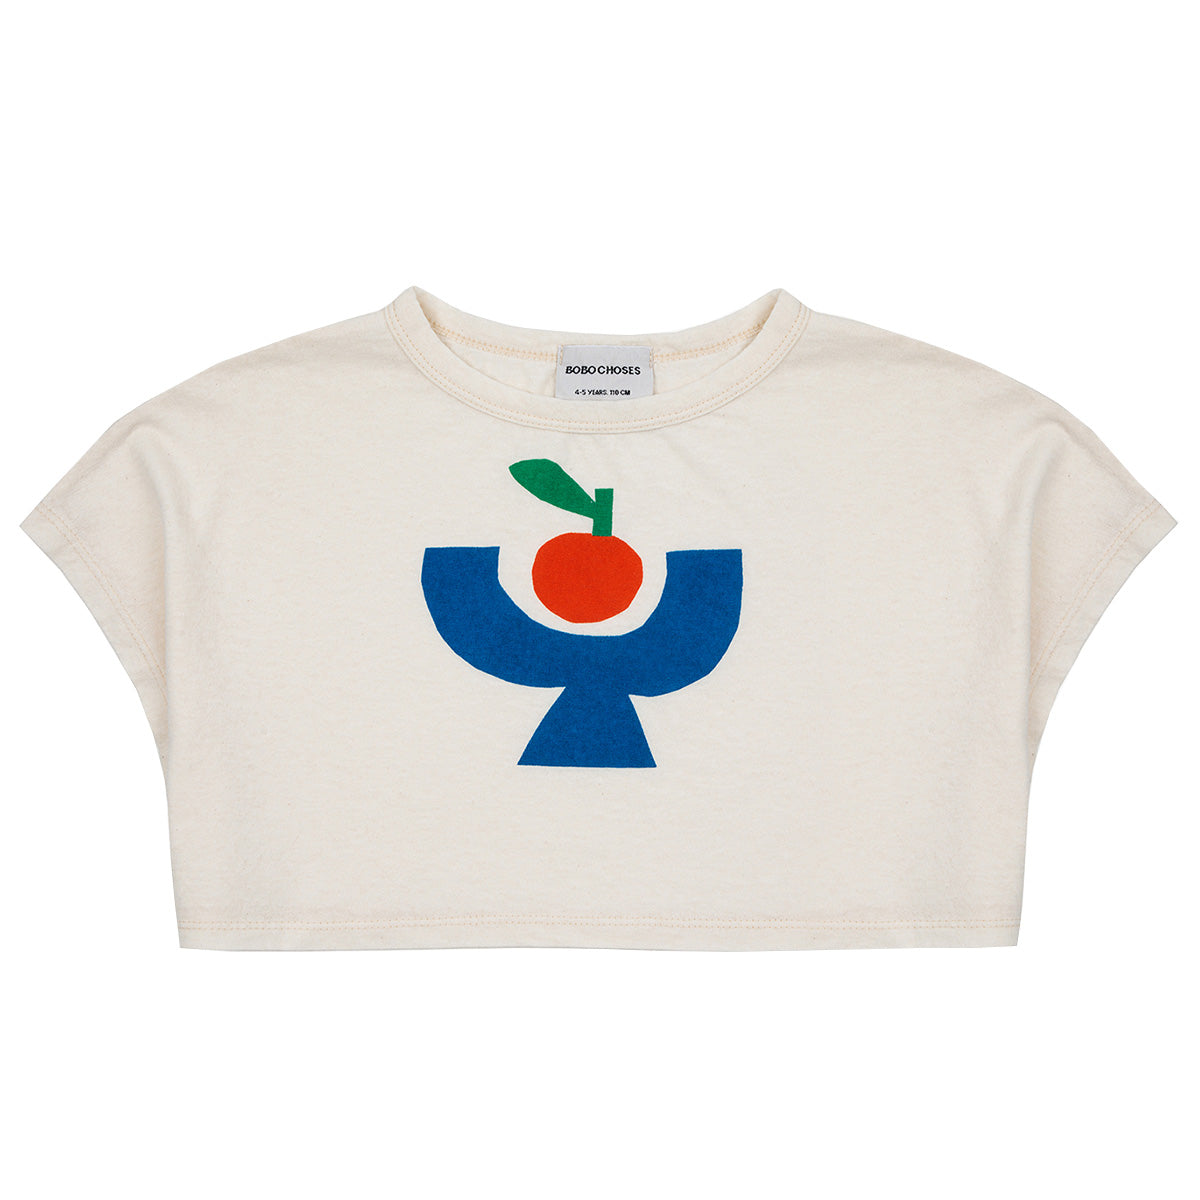 The Tomato Plate Cropped Tee from Bobo Choses. Designed with sleeveless, loose fit, round neck and cropped length.